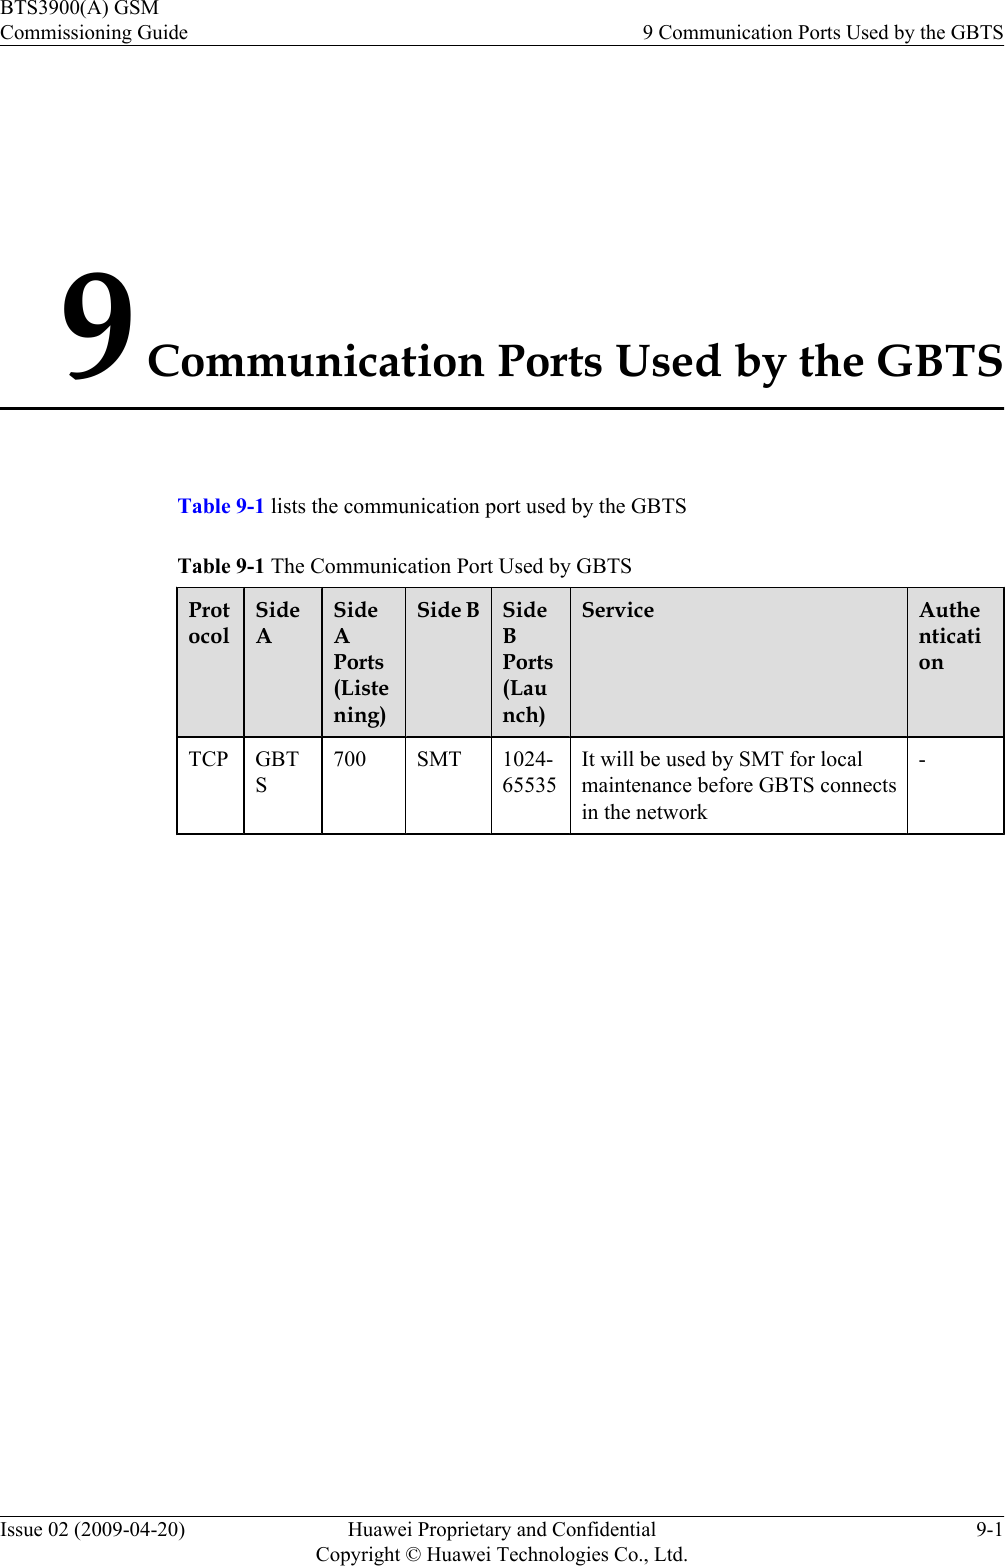 9 Communication Ports Used by the GBTSTable 9-1 lists the communication port used by the GBTSTable 9-1 The Communication Port Used by GBTSProtocolSideASideAPorts(Listening)Side B SideBPorts(Launch)Service AuthenticationTCP GBTS700 SMT 1024-65535It will be used by SMT for localmaintenance before GBTS connectsin the network-BTS3900(A) GSMCommissioning Guide 9 Communication Ports Used by the GBTSIssue 02 (2009-04-20) Huawei Proprietary and ConfidentialCopyright © Huawei Technologies Co., Ltd.9-1